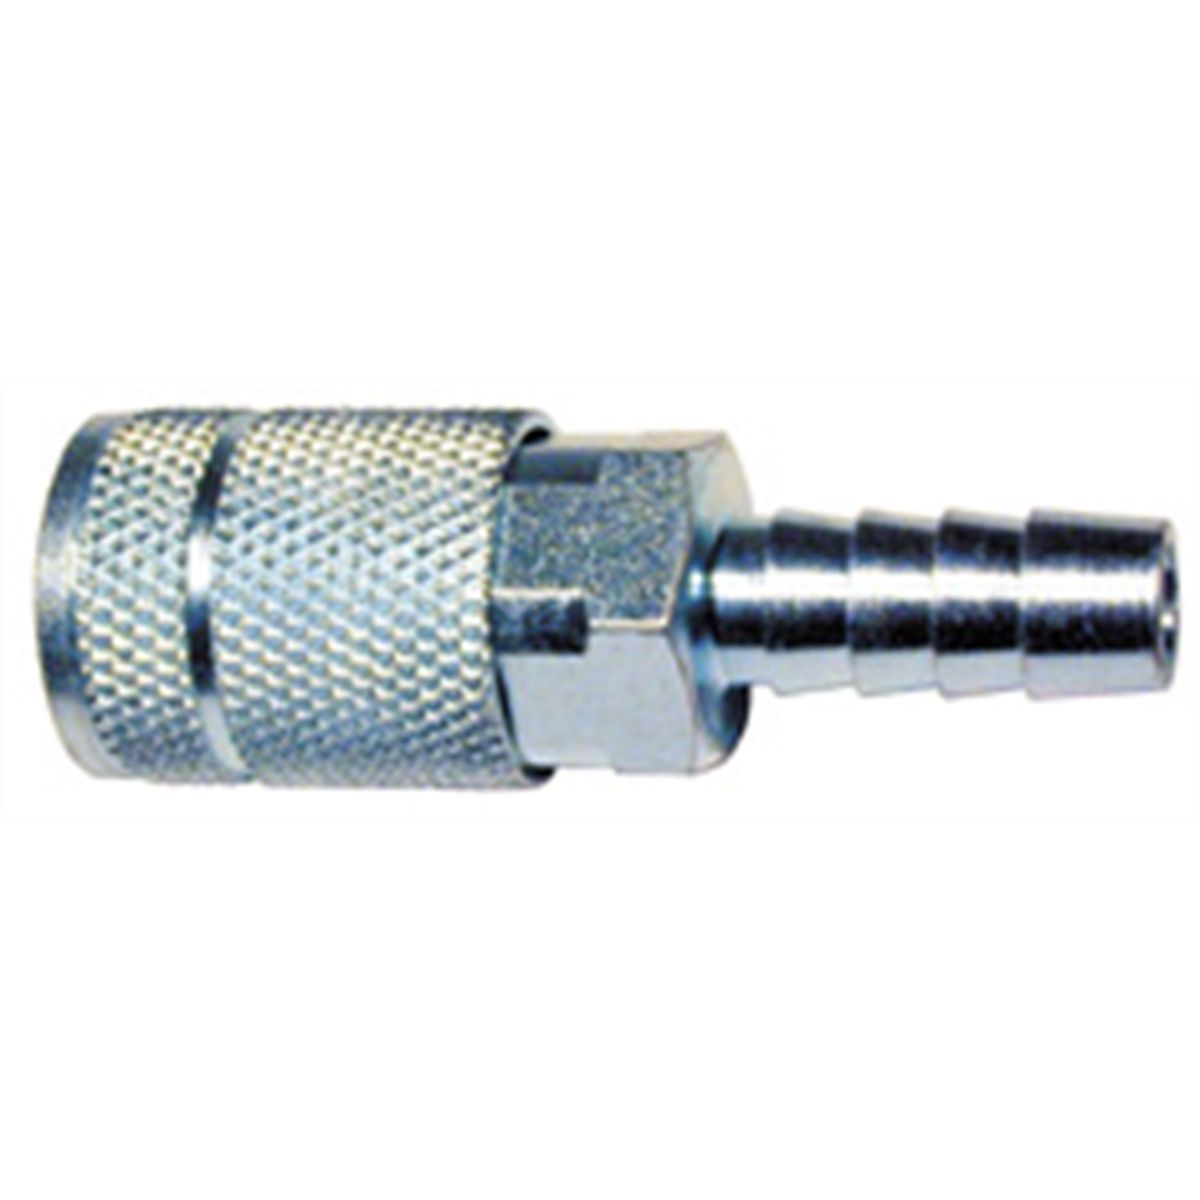 Hose Barb Automotive Standard Series Coupler - Type C - 3/8 In N